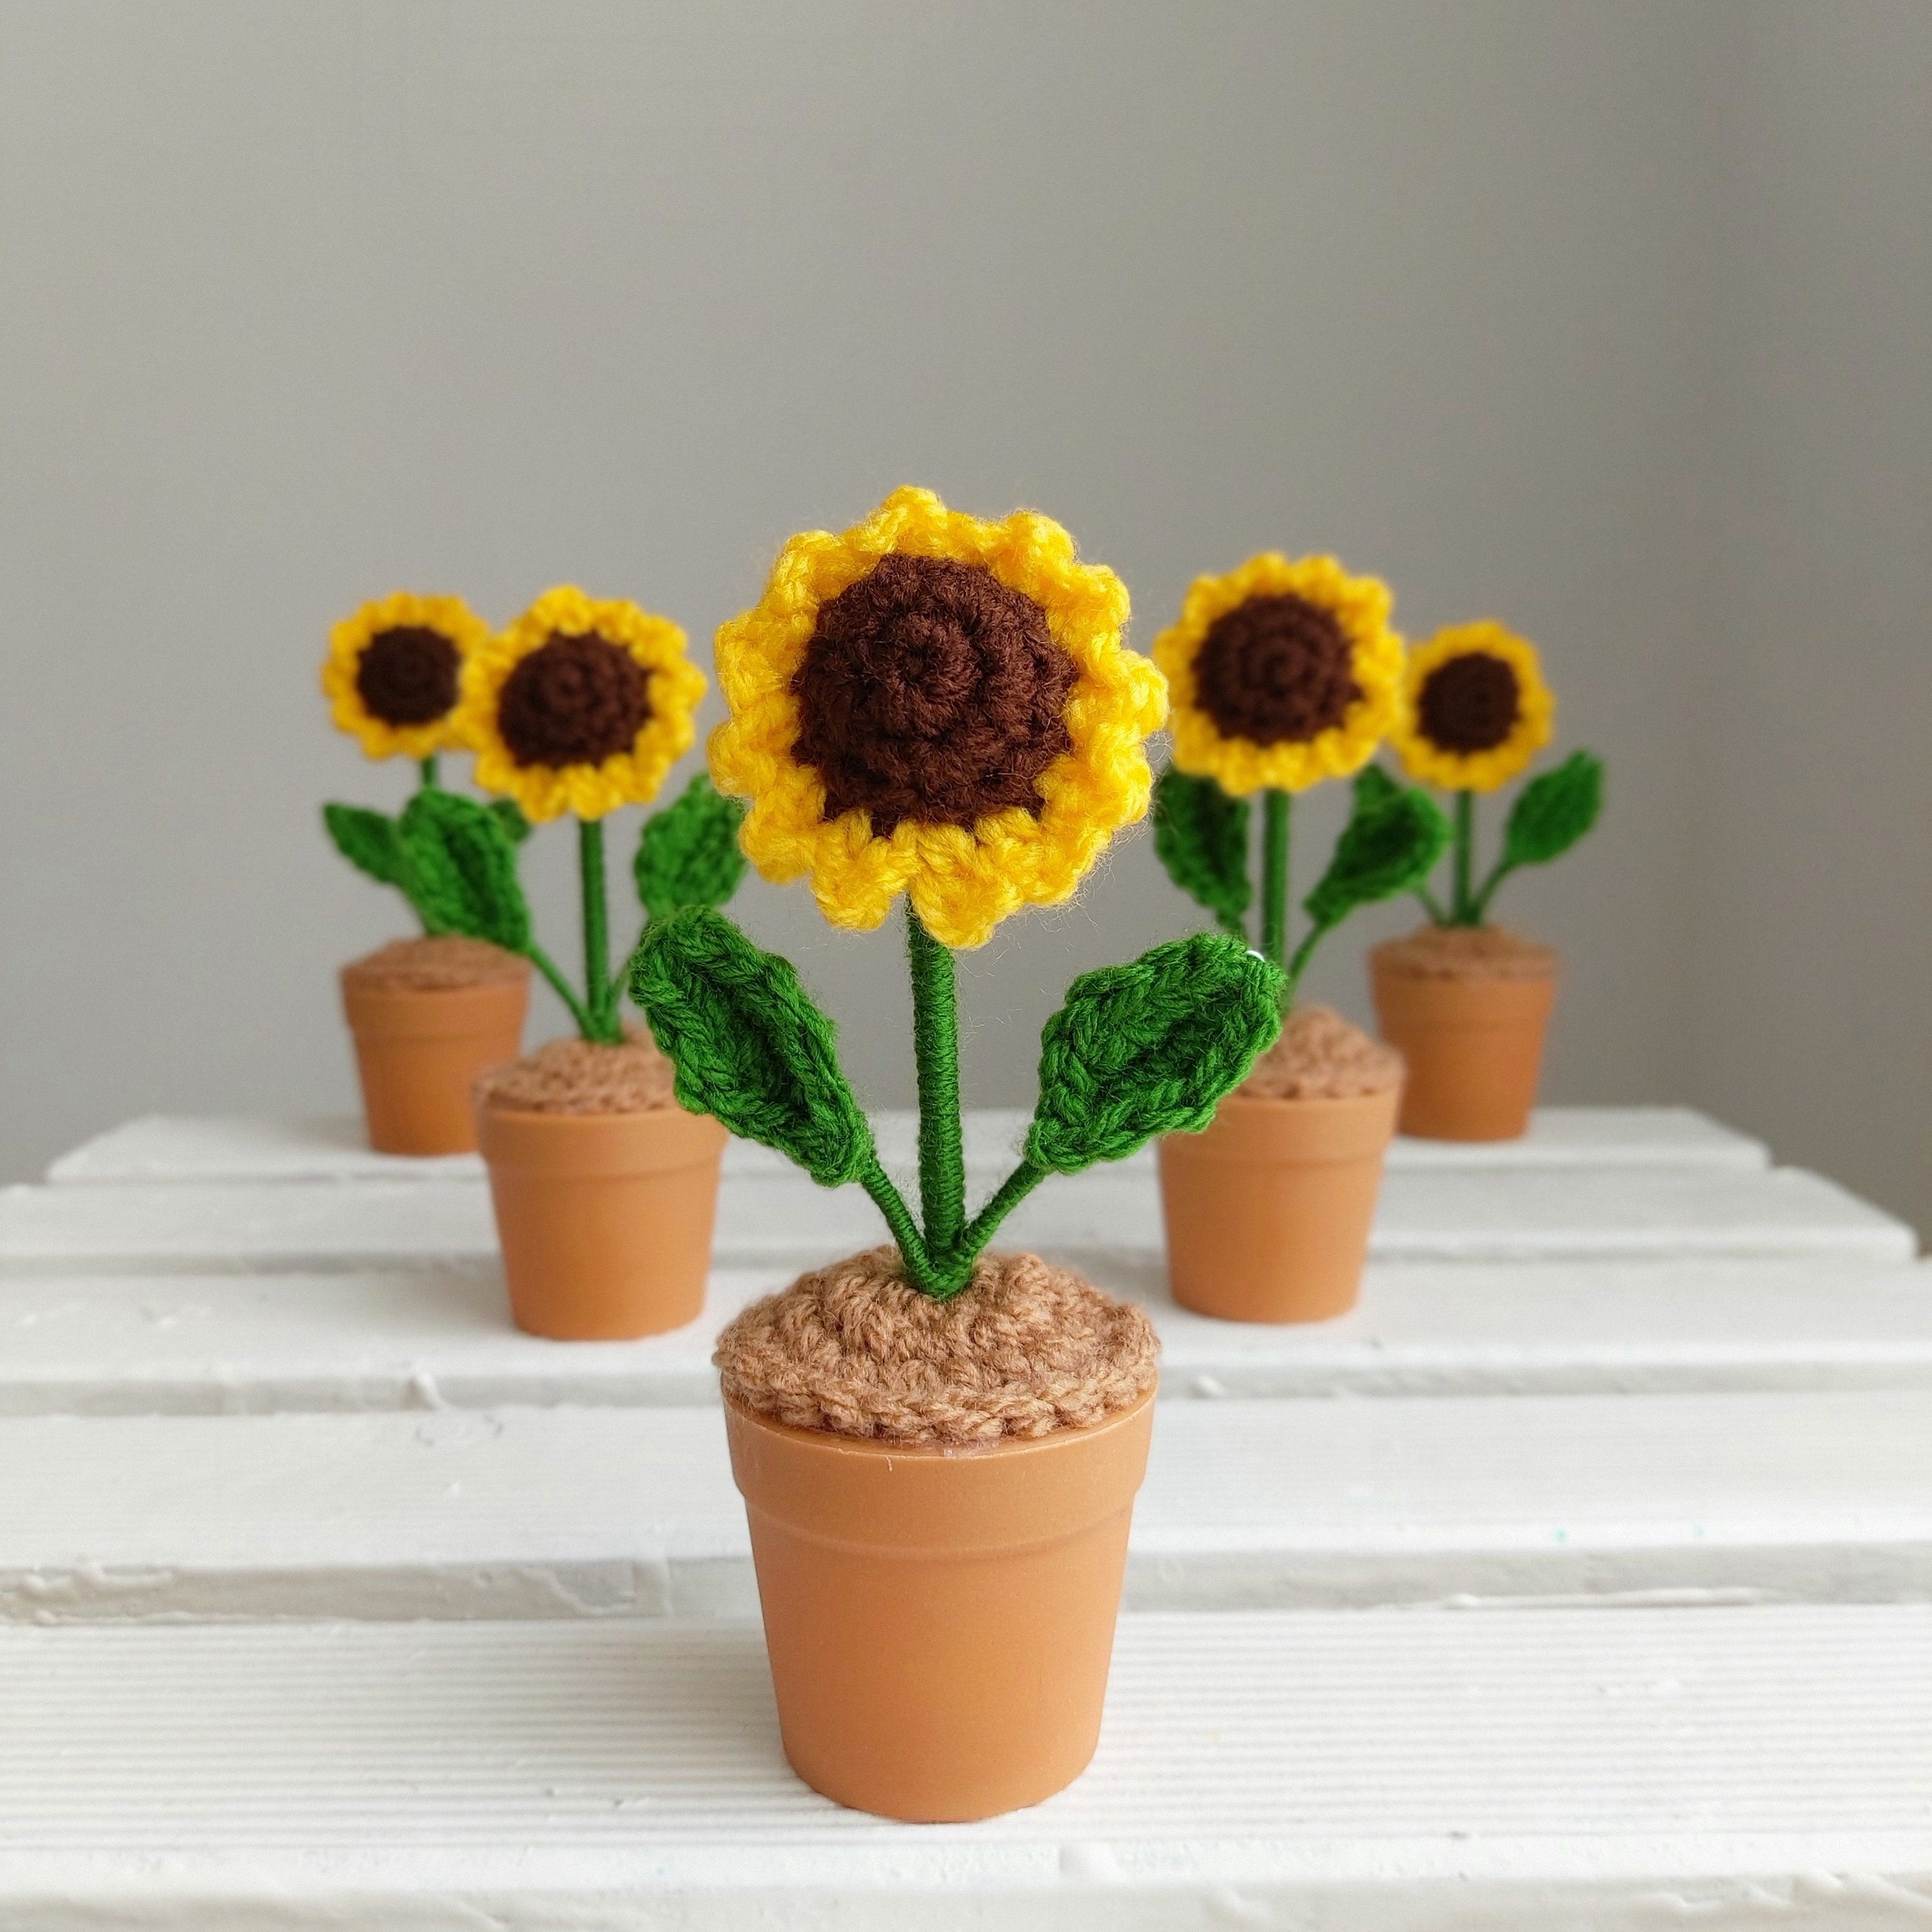 Artificial Miniature Flowers in a White Pot, Yellow and Red